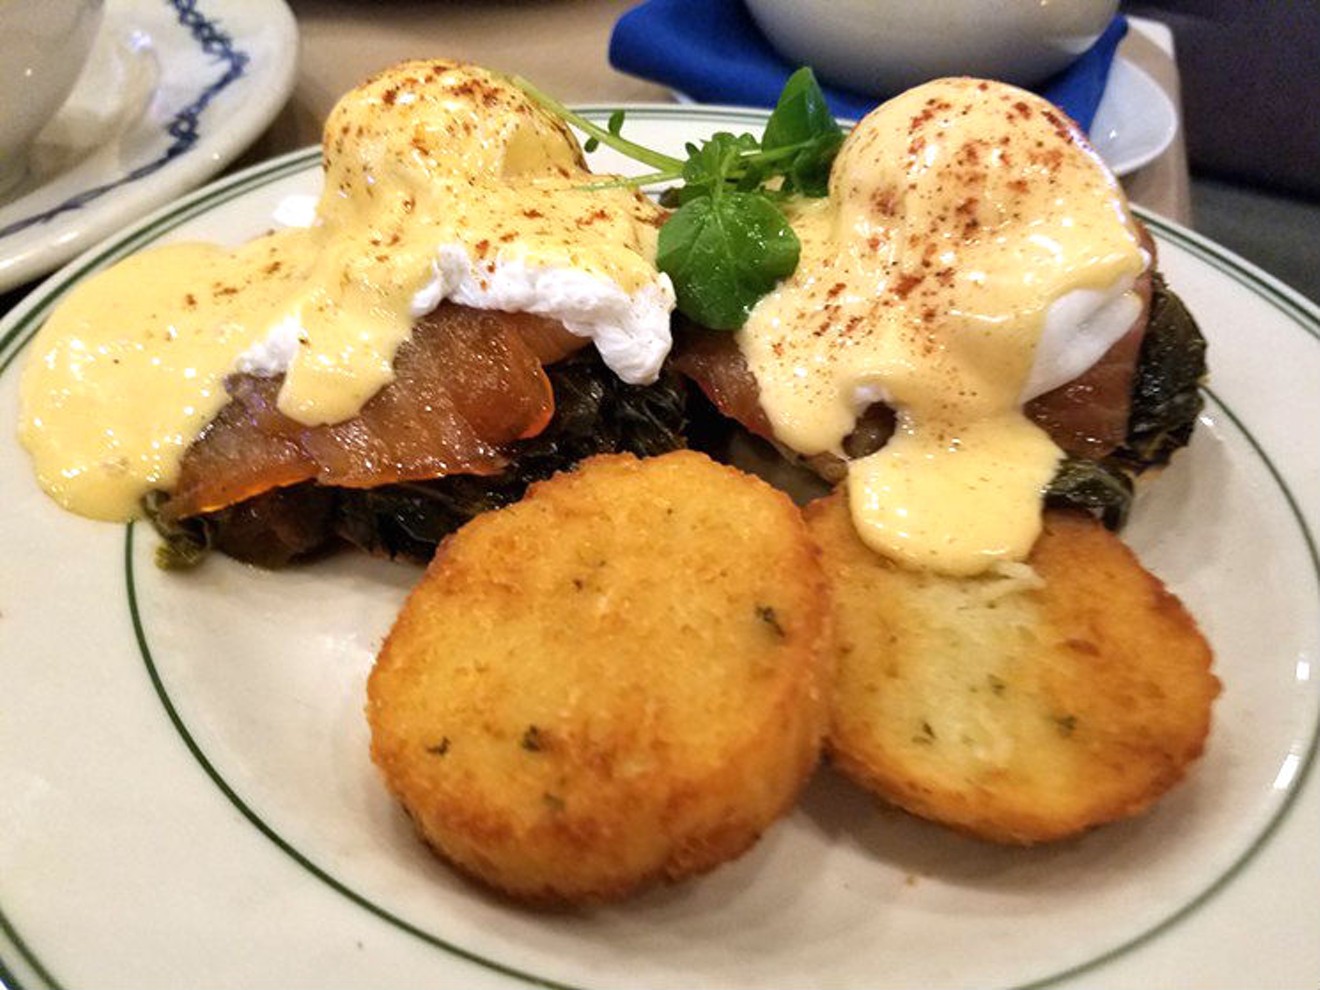 The hollandaise appears to making its getaway — not that we blame it.